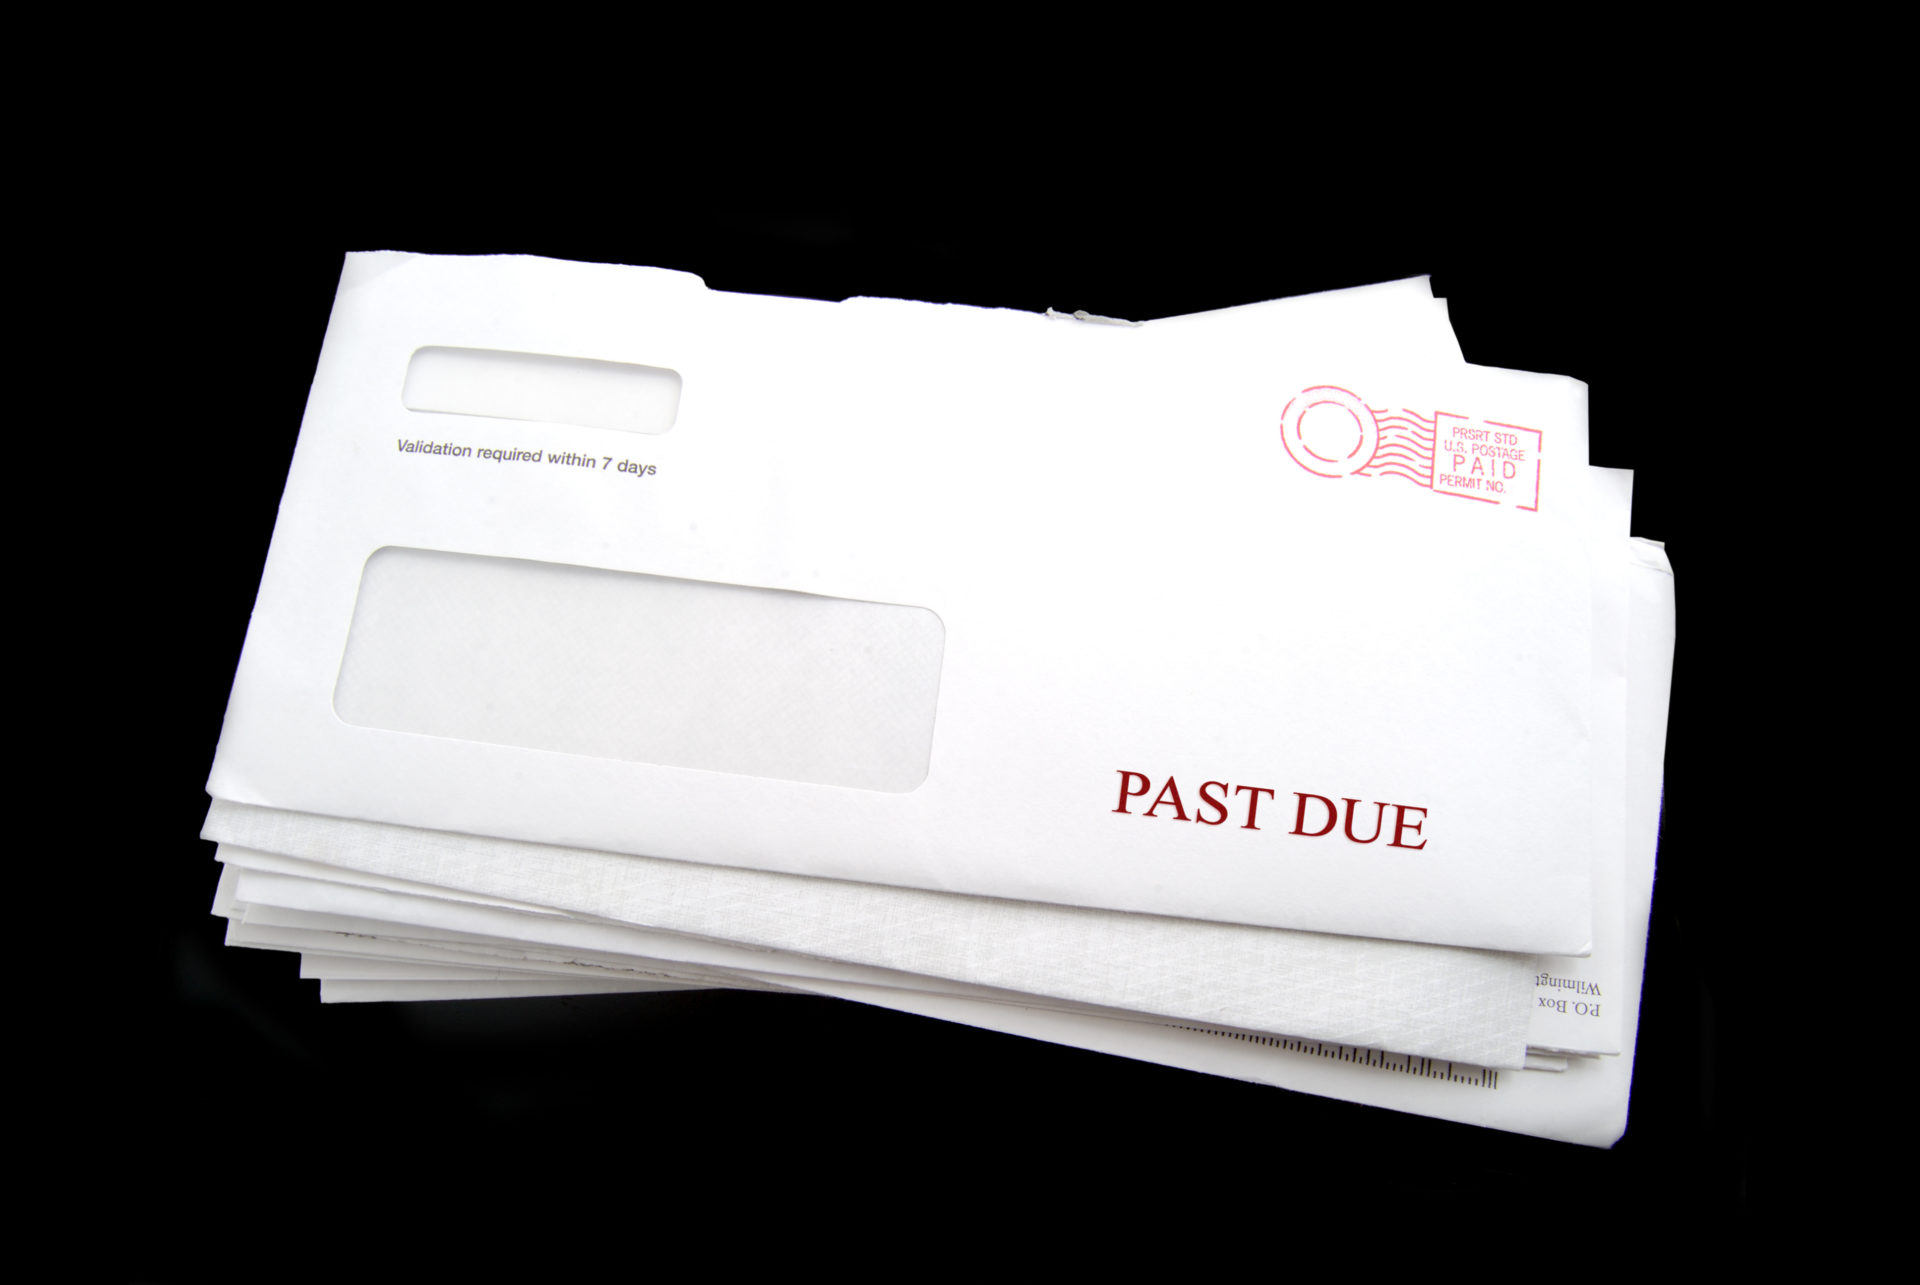 Debt Collection - Transactional Mail